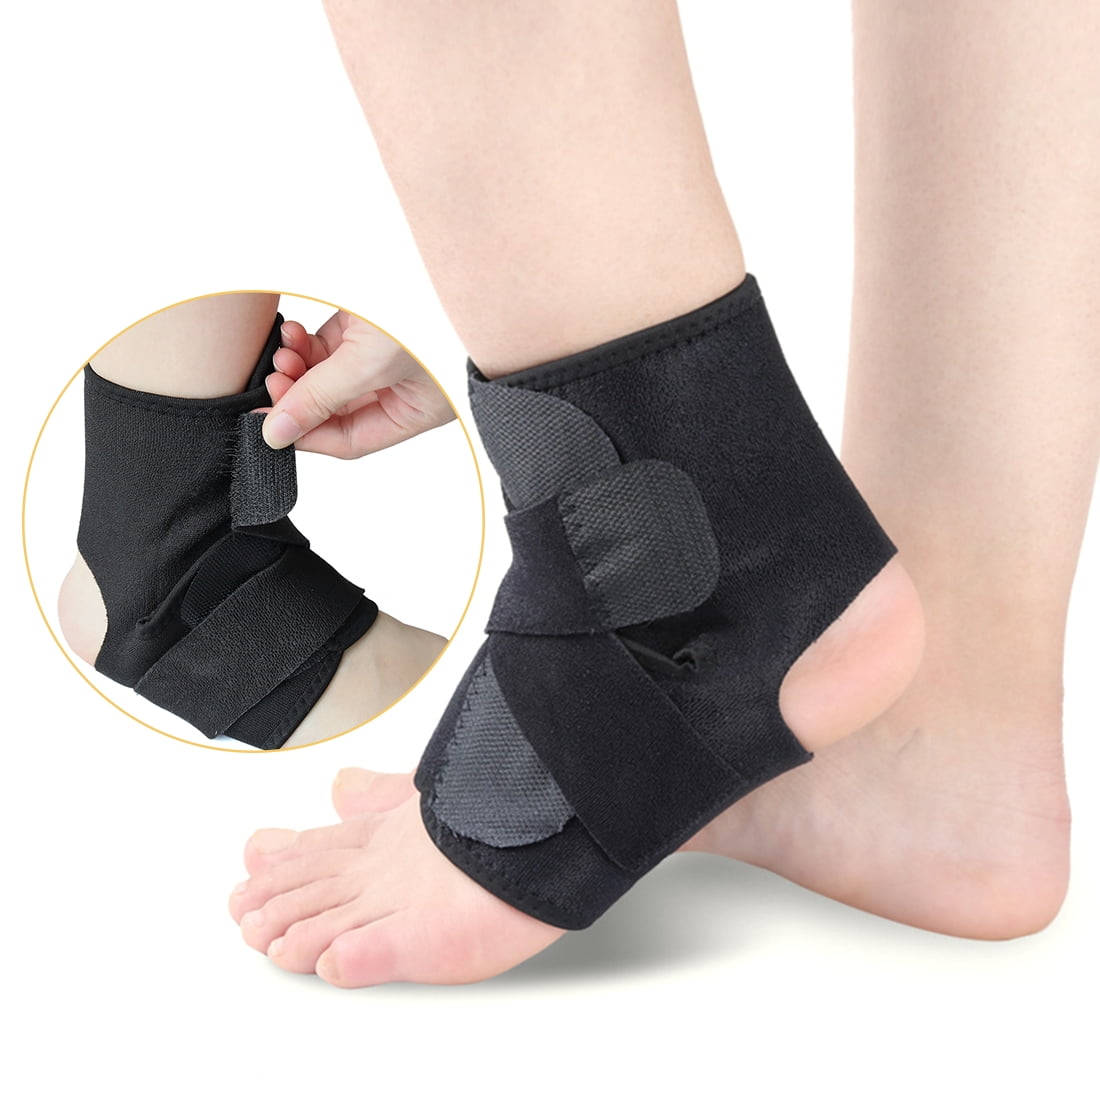 Ankle Brace Foot Drop Compression Wrap Sleeve Support Plantar Fasciitis Guard 